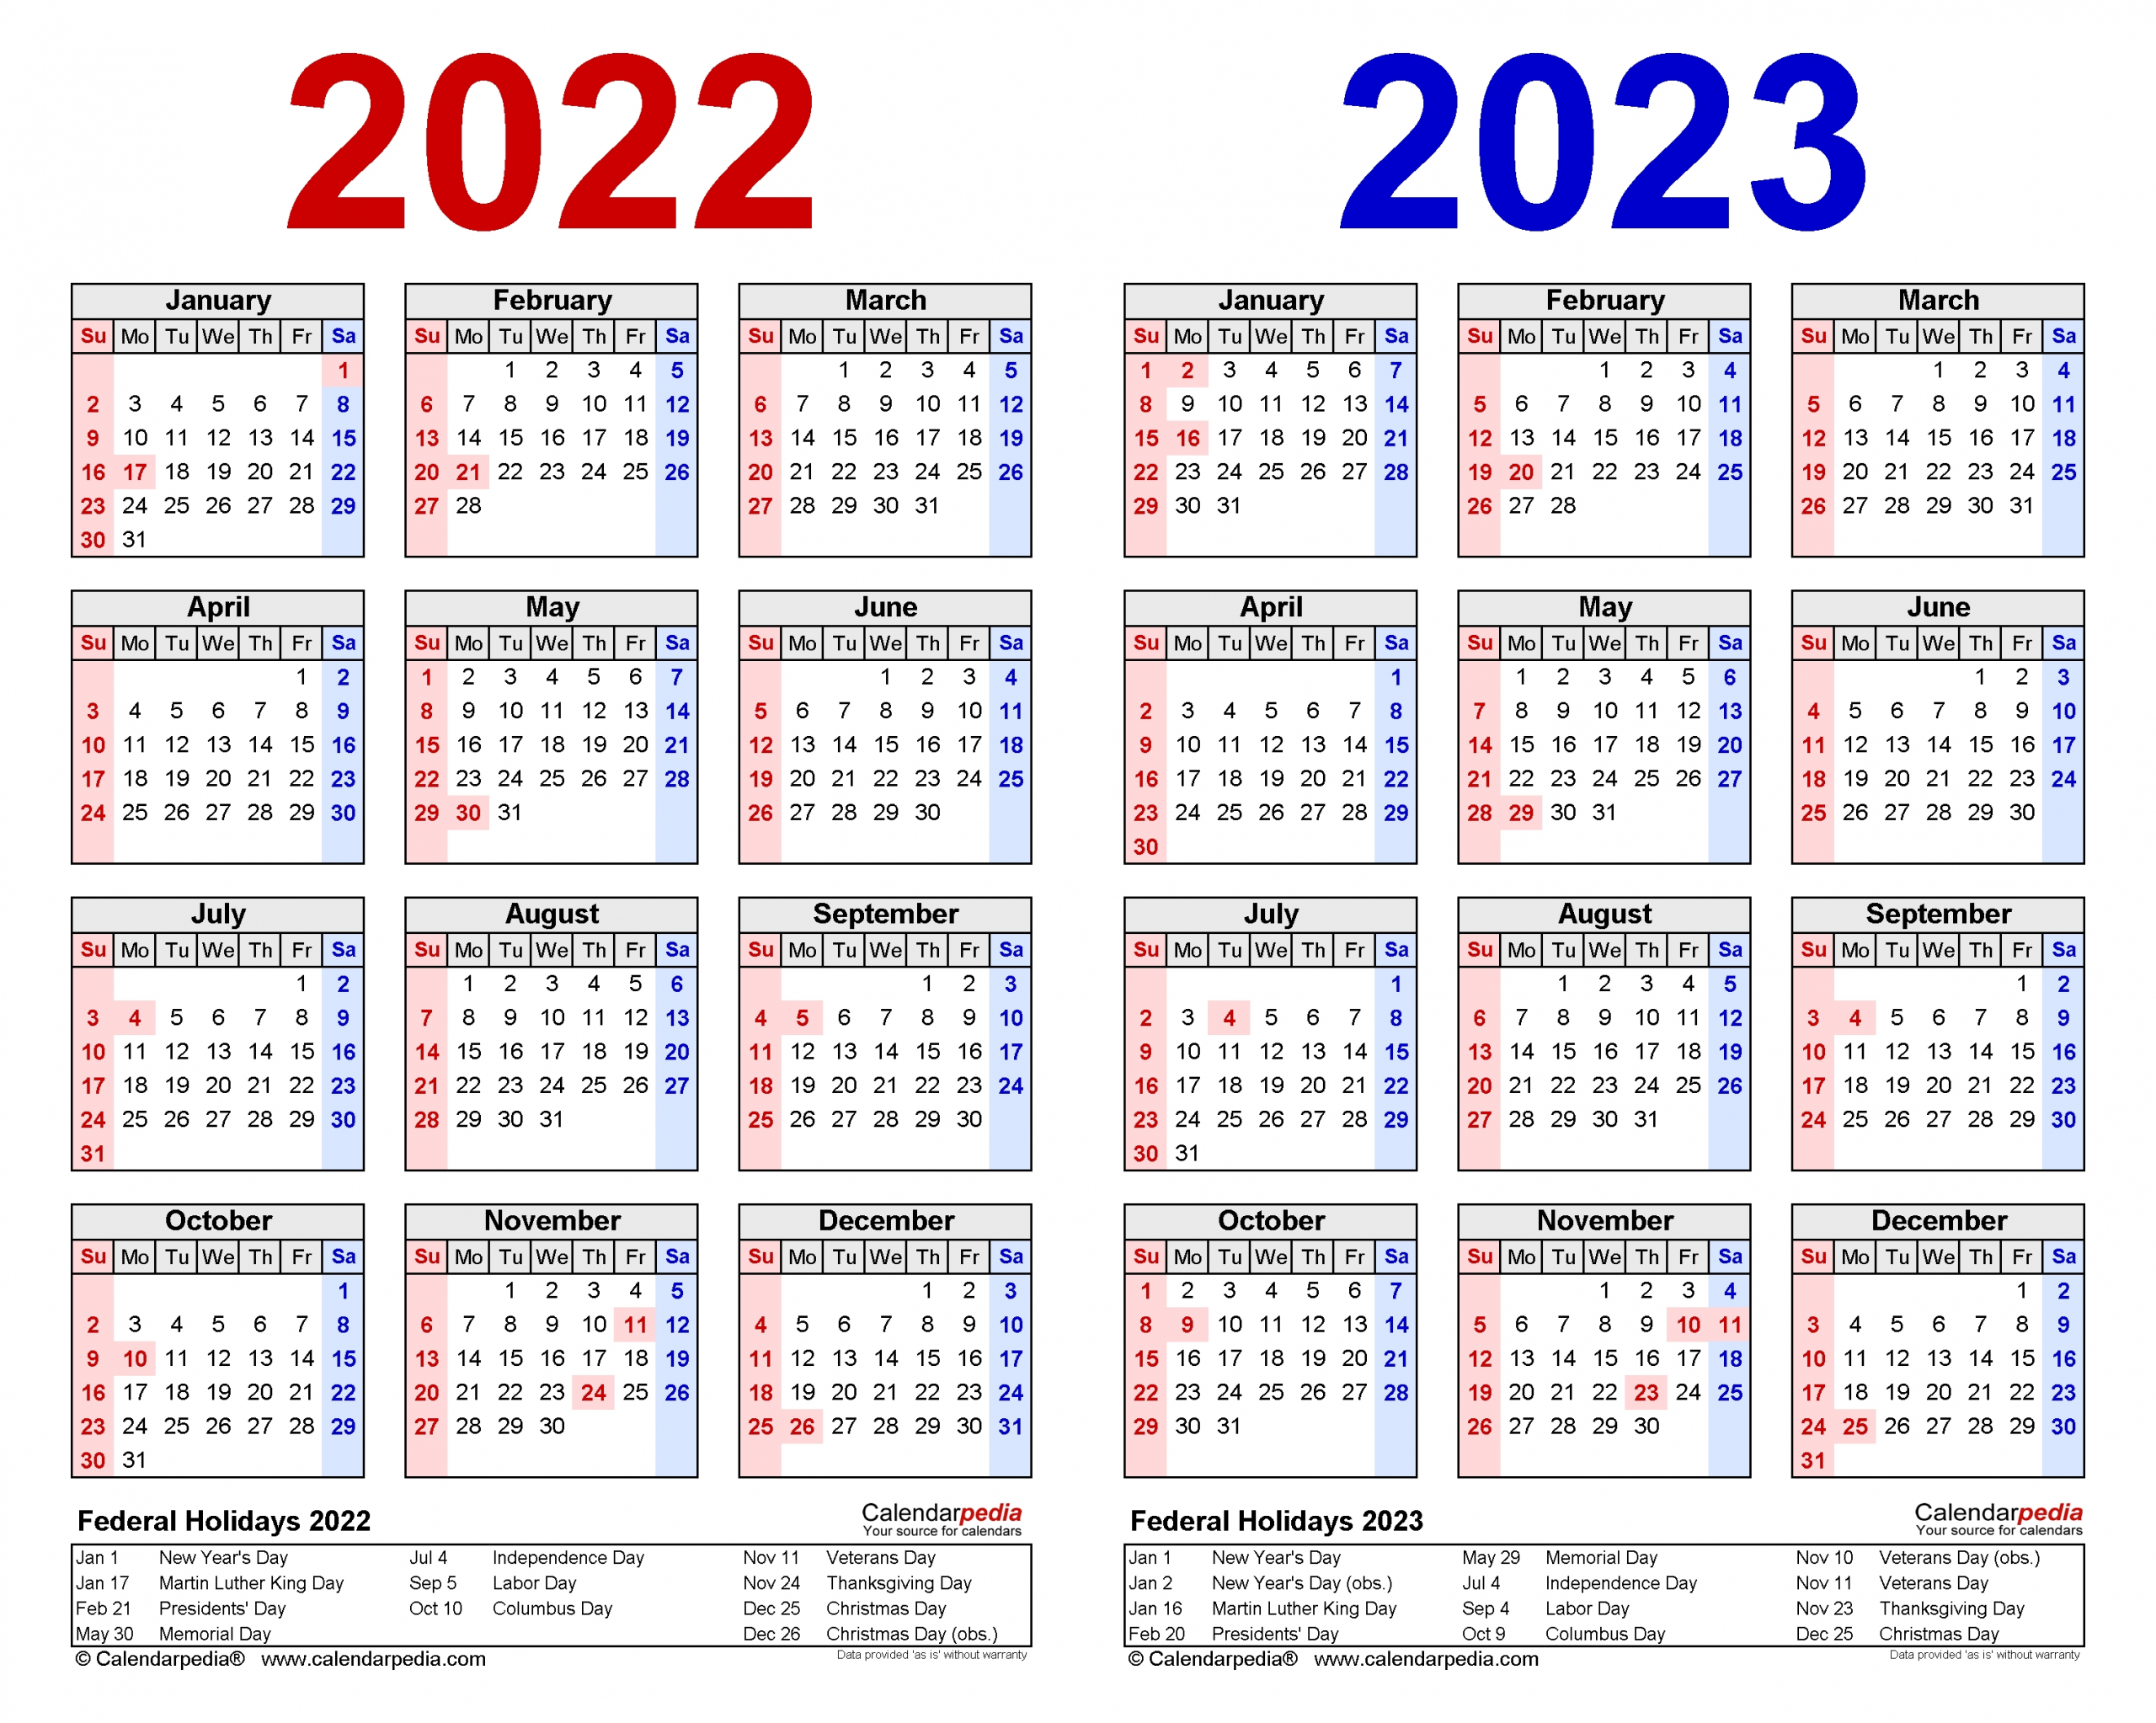 Take Which Week Of The Financial Year 2021 2022 Is This